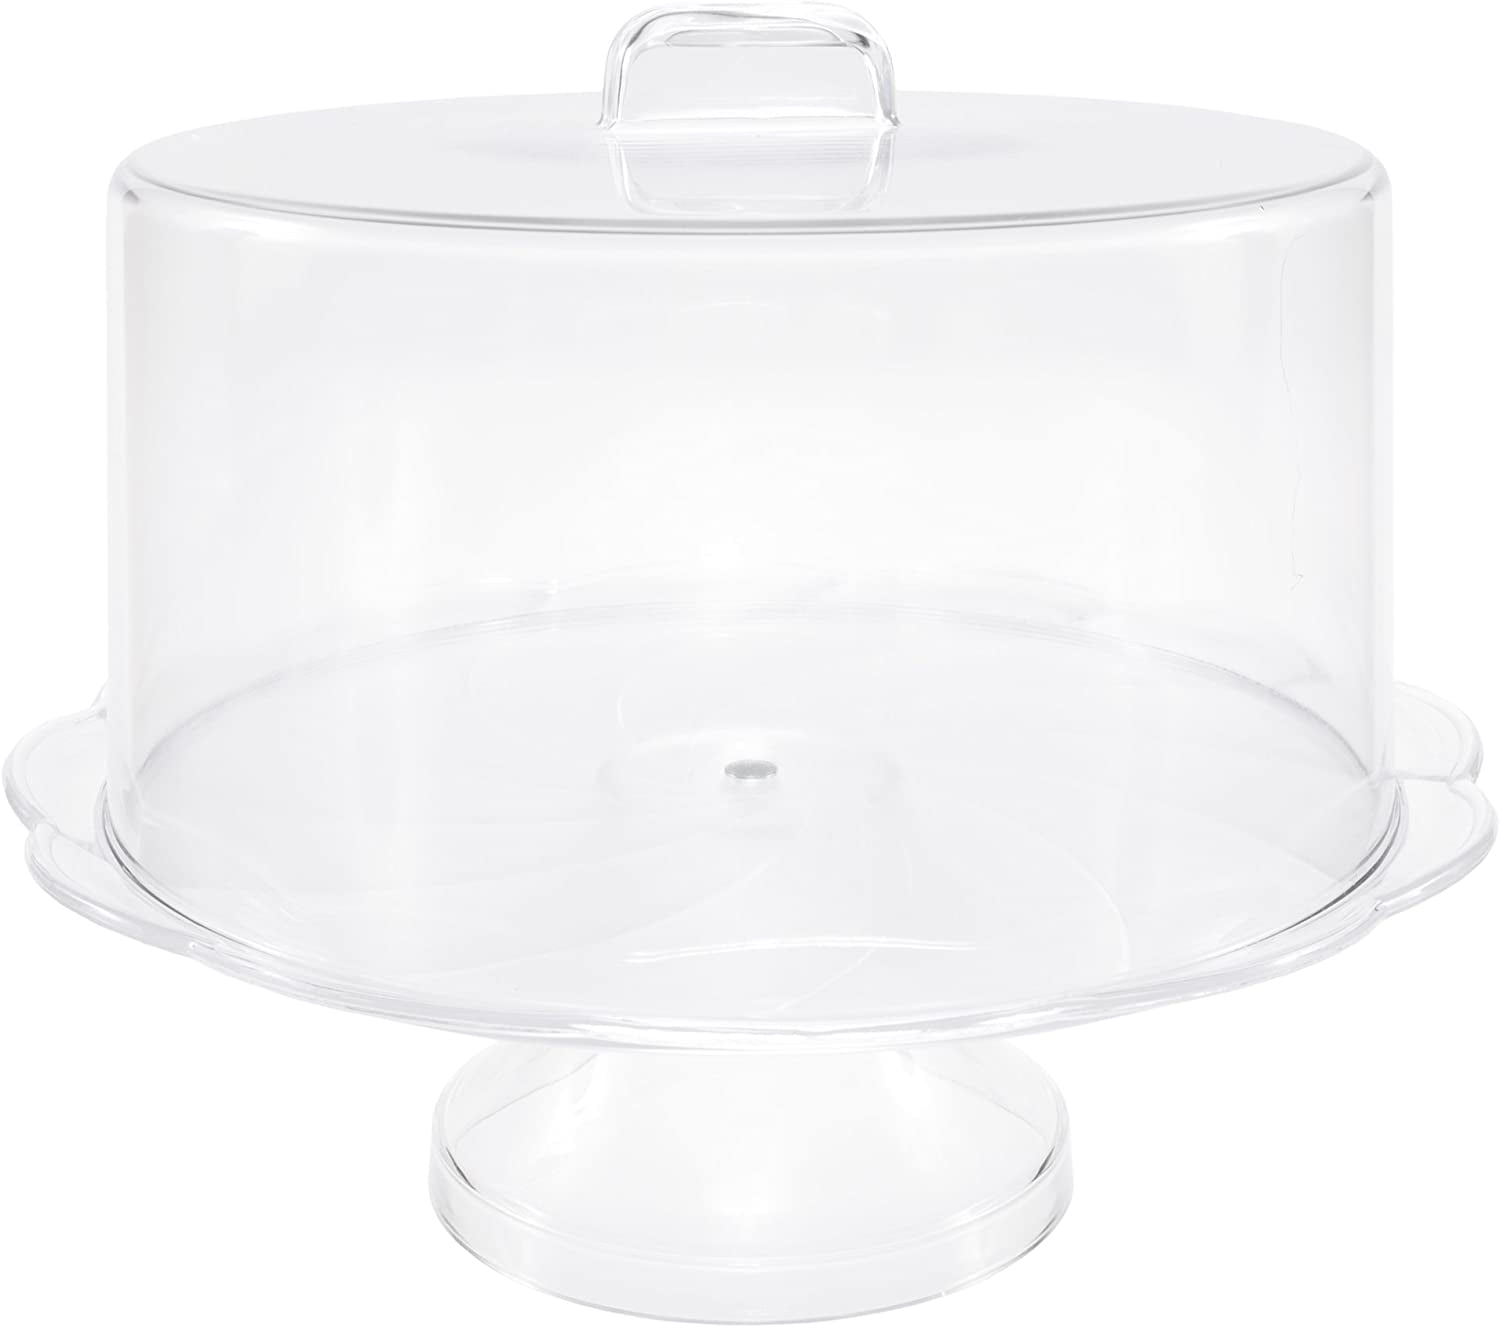 Plastic Cake Dome & Metal Plate 30cm Cake Dome & Plate Cover Display